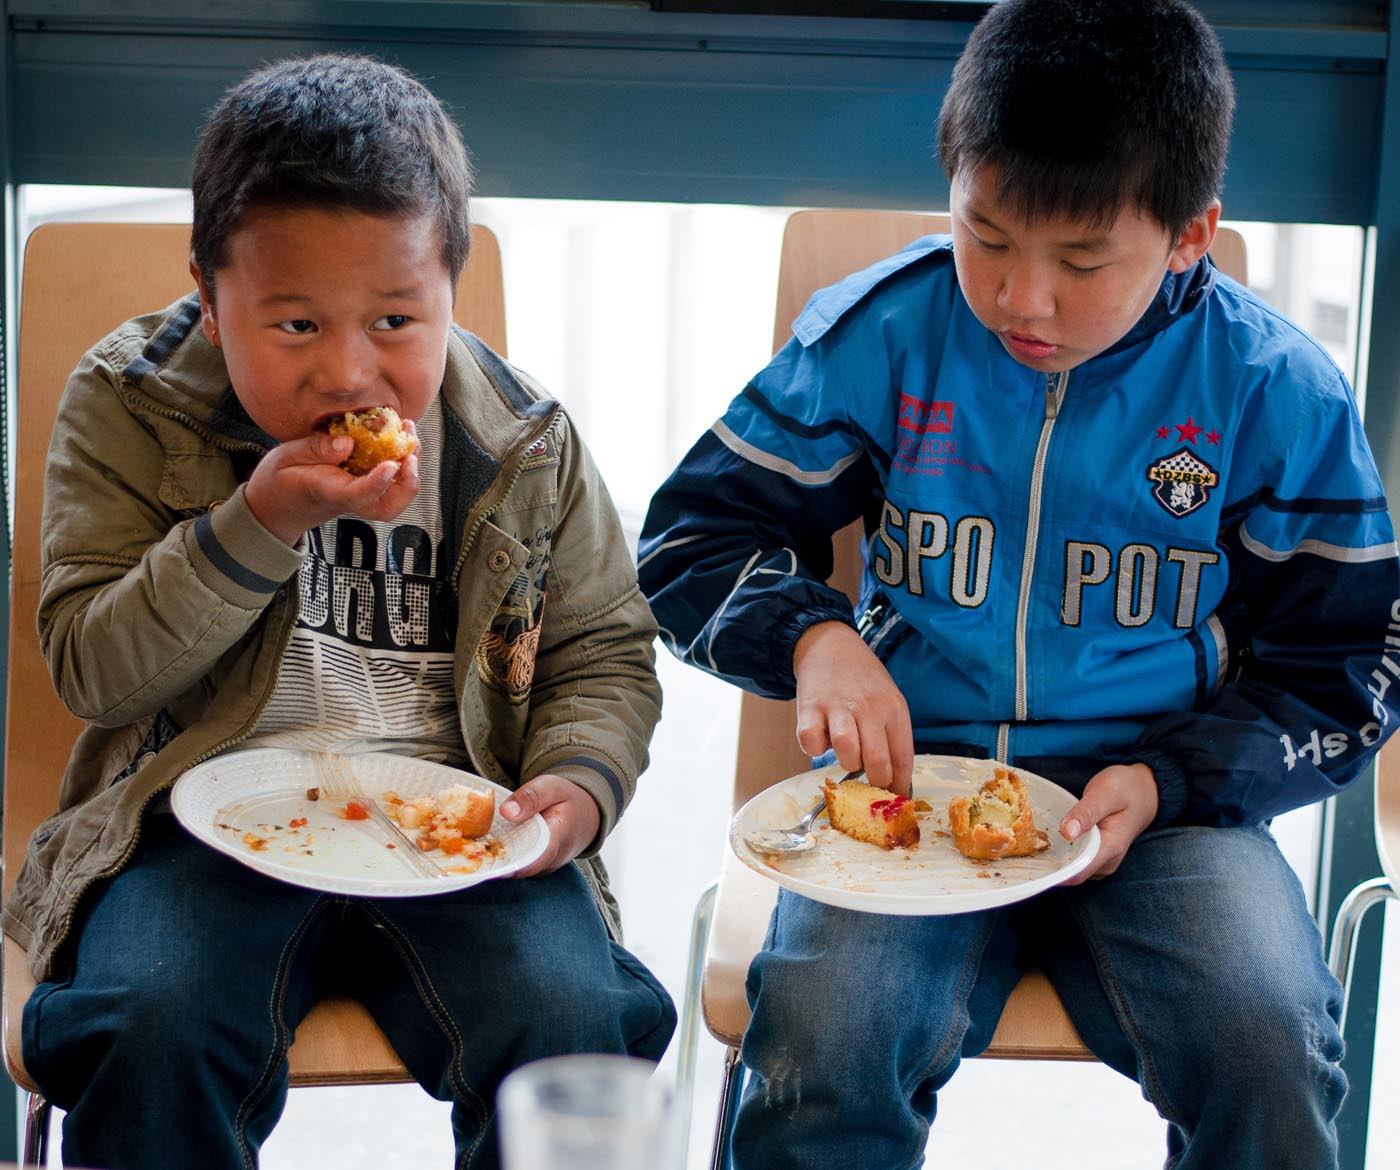 Photo of two young boys sitting down holding plates with various items on them with the boy on the left in the midst of placing an item in his mouth and the boy on the right using his fingers to pick up an item from the plate - click to view larger image